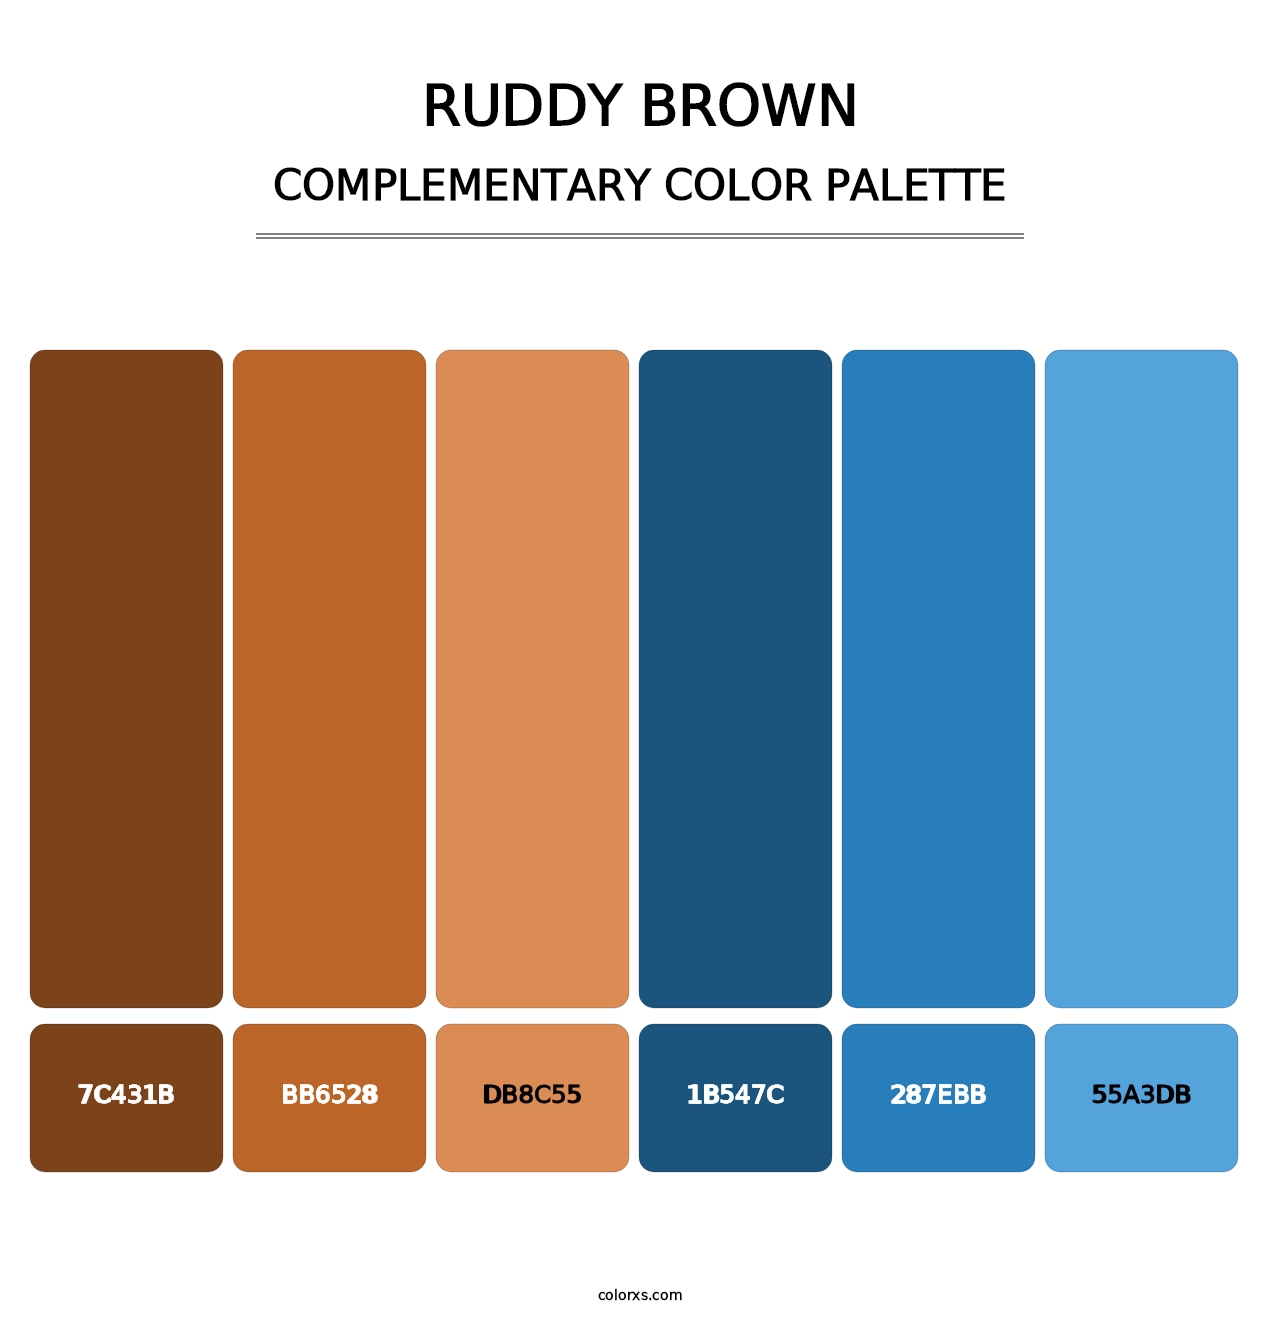 Ruddy Brown - Complementary Color Palette